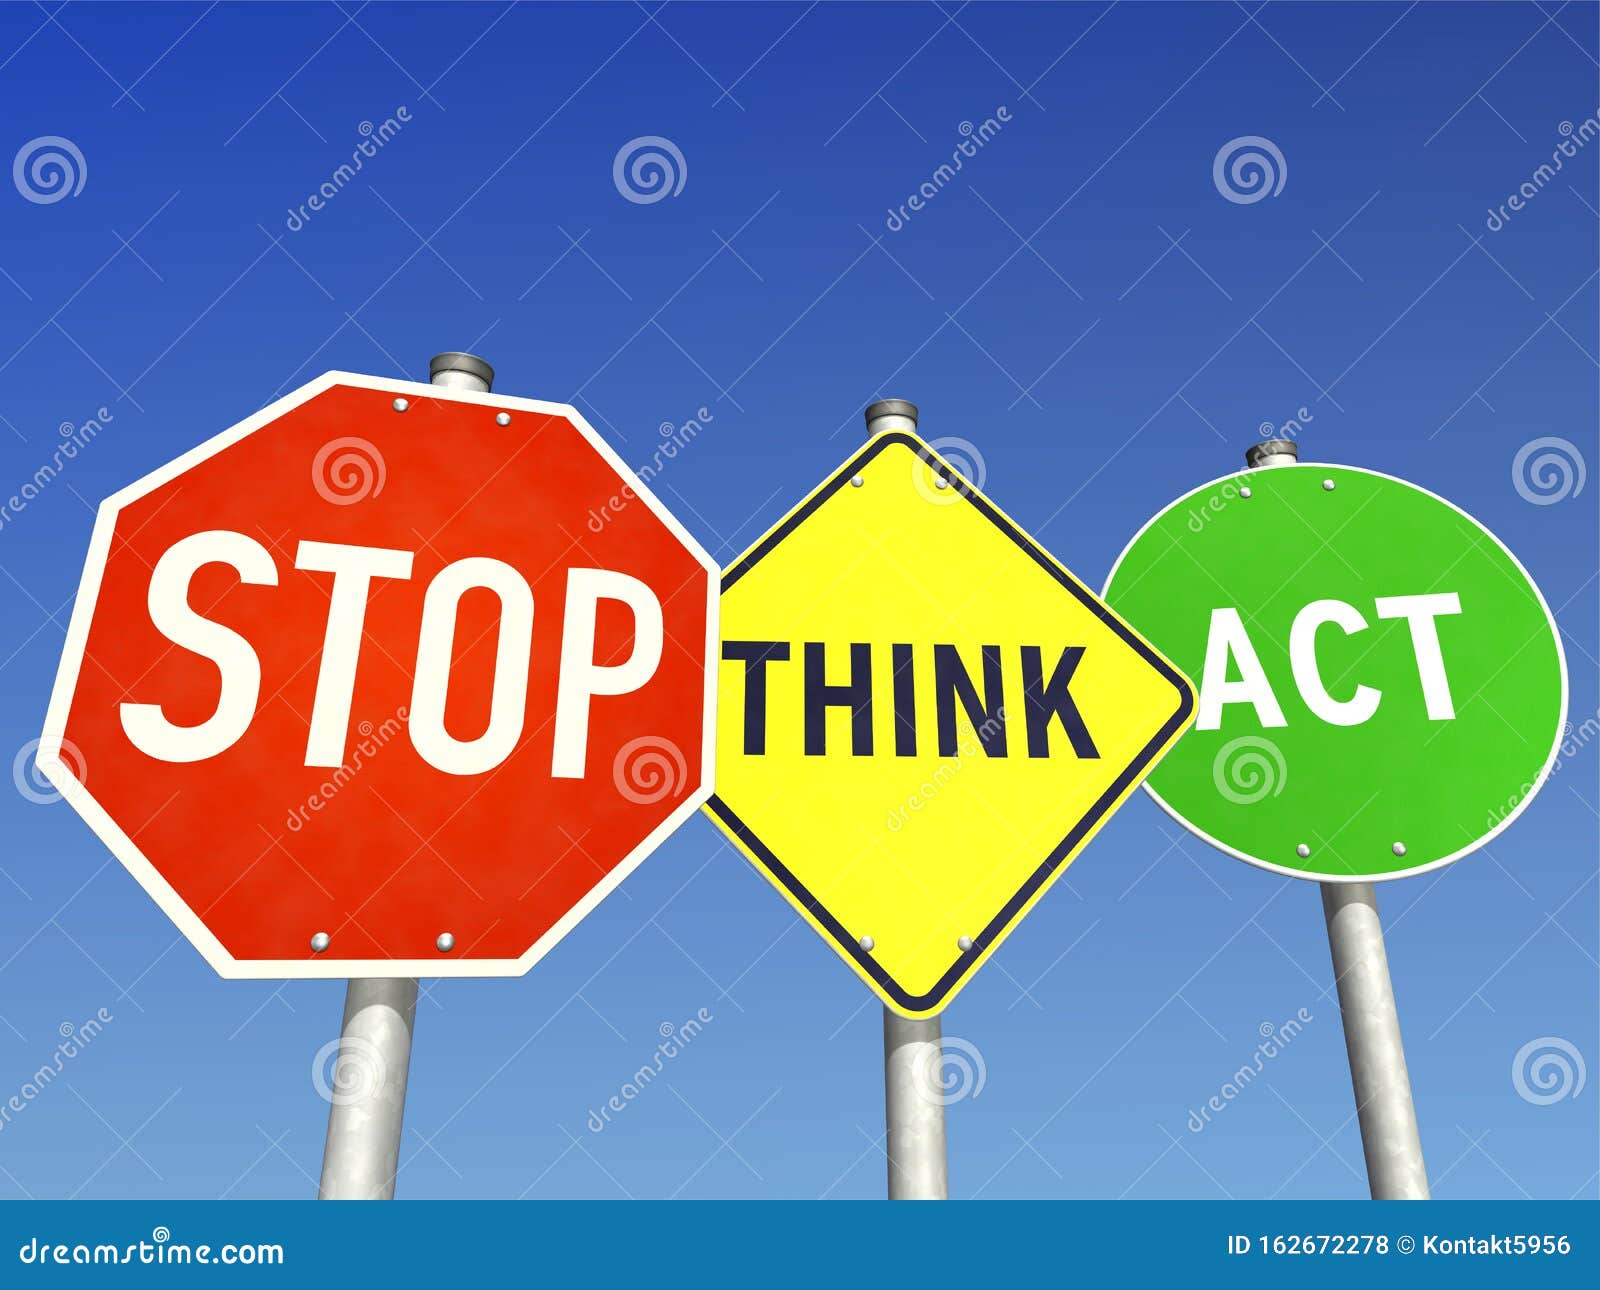 stop, think and act